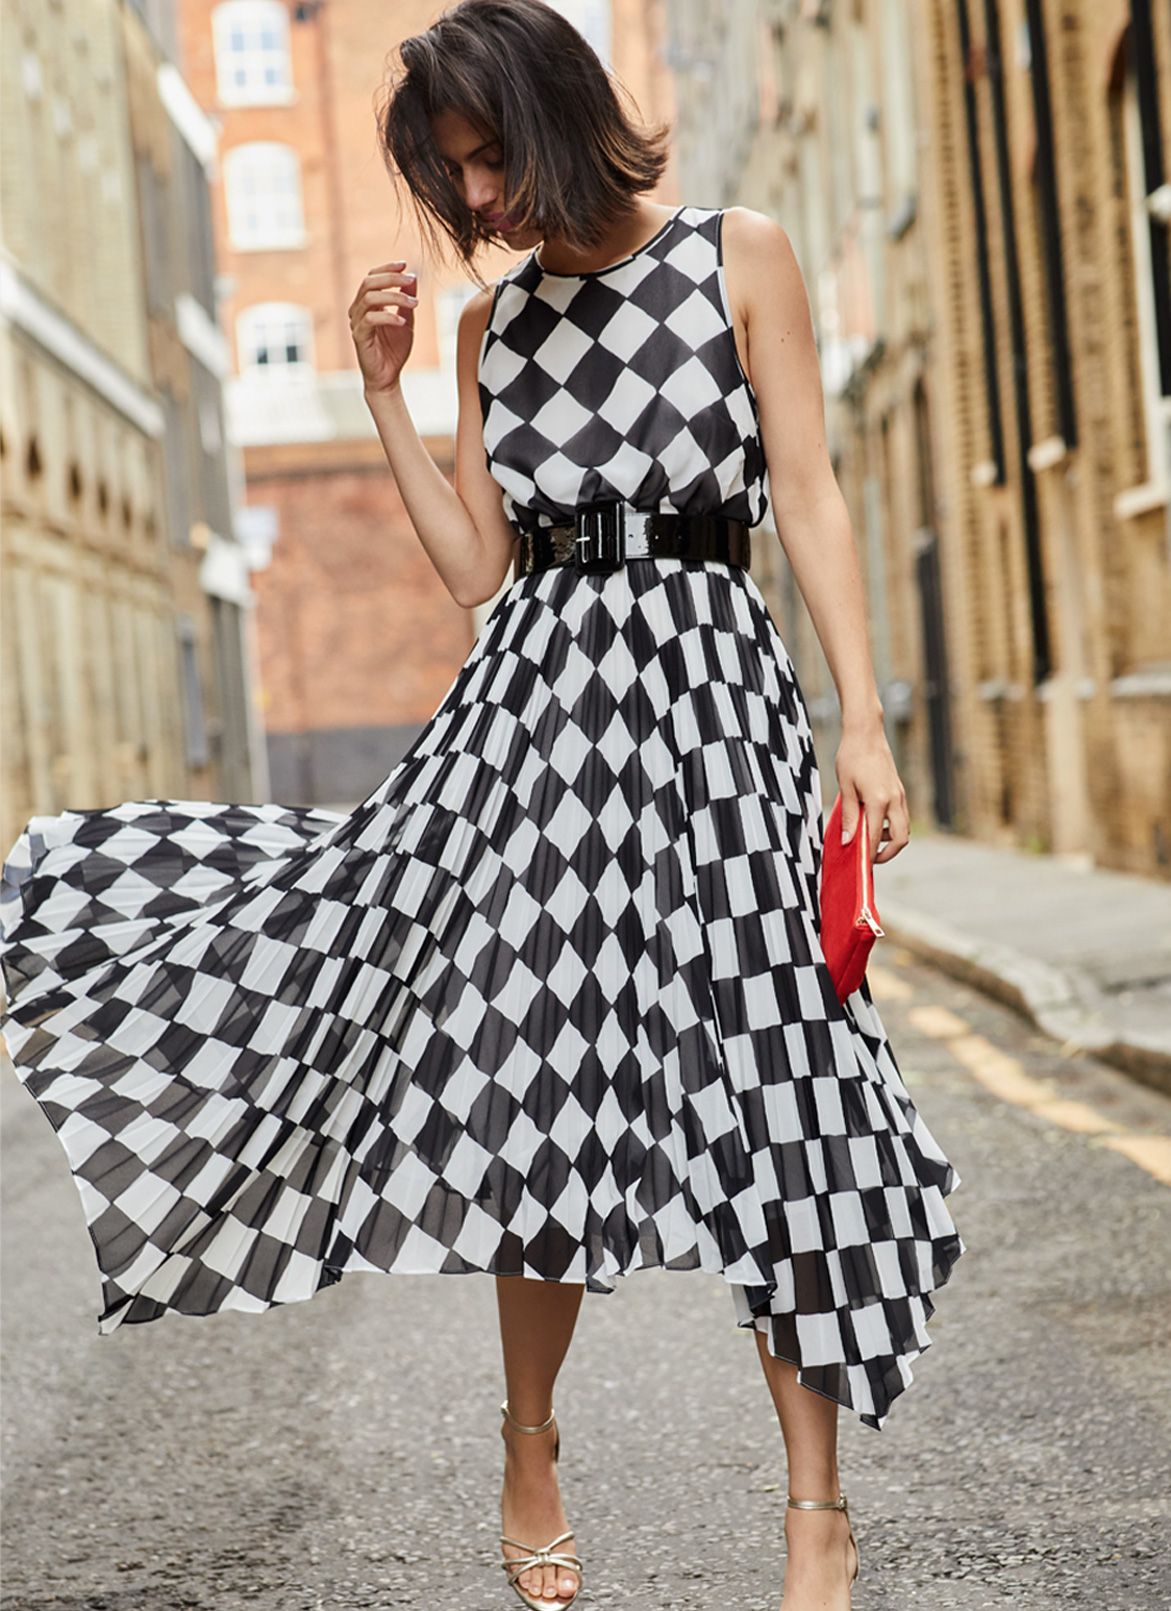 Woman looking down in black and white check occasion dress with bright red bag